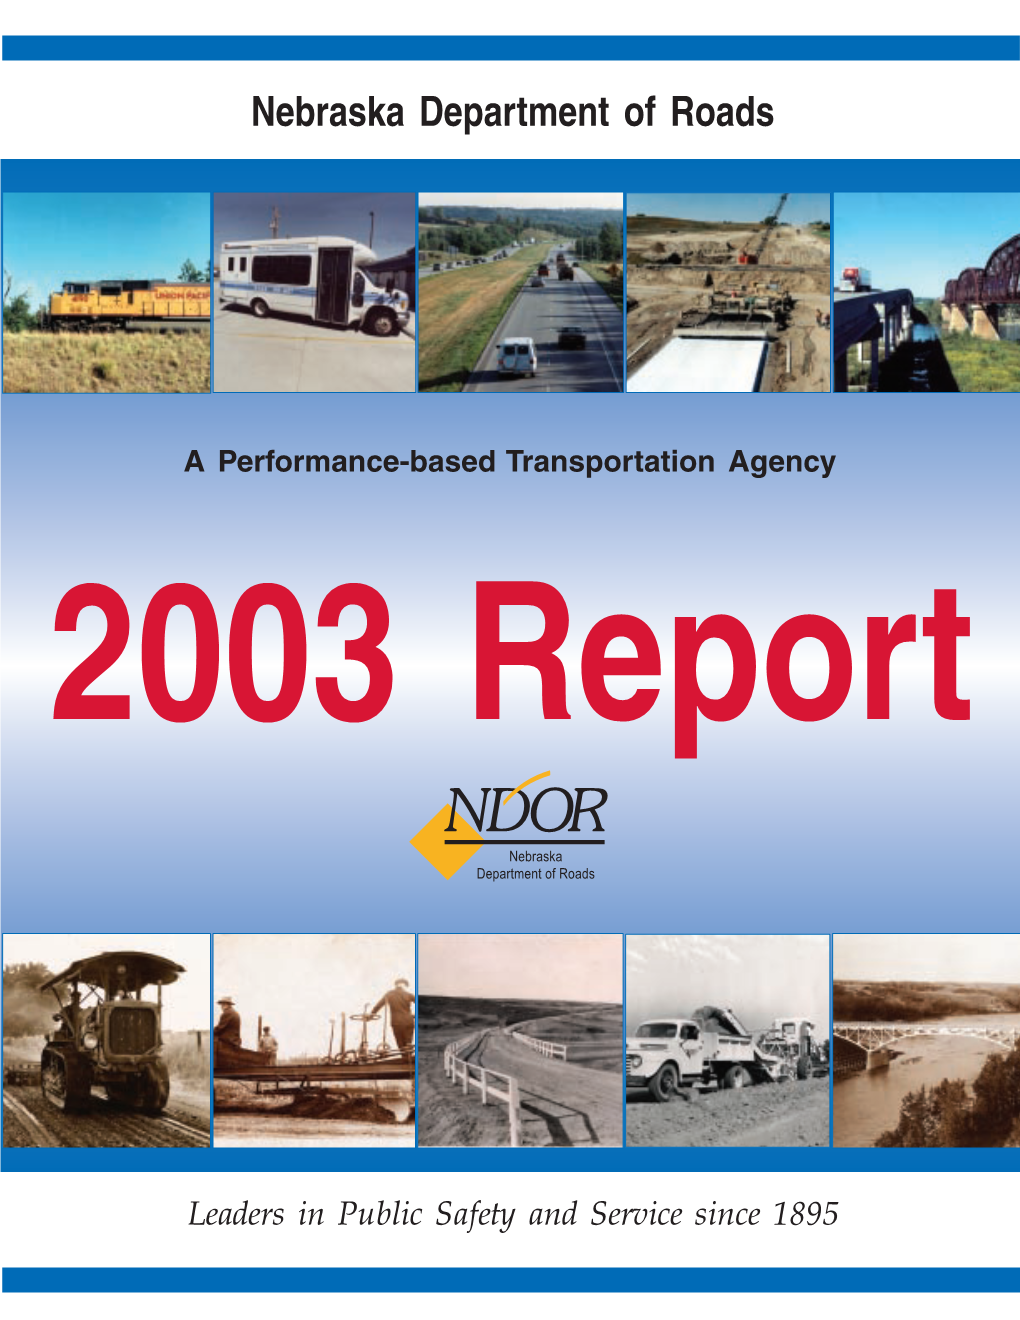 Annual Report For